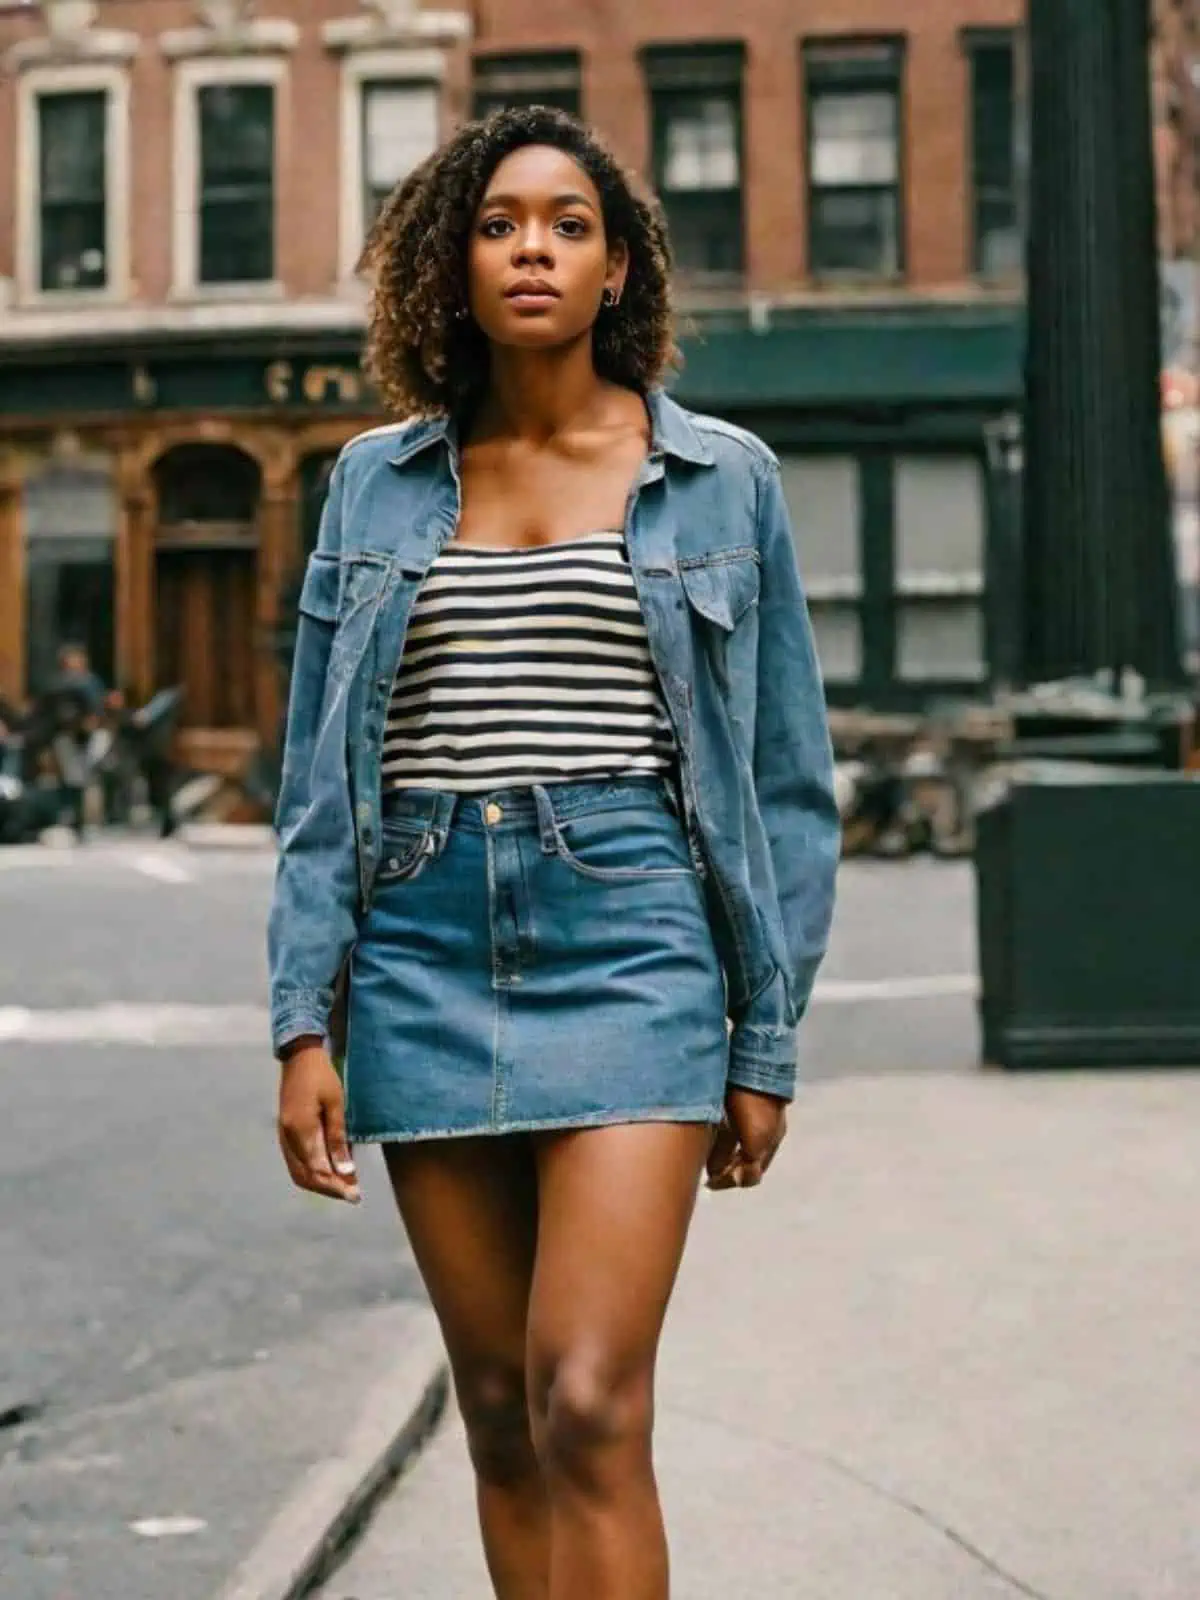 Denim skirt outfit ideas: 8 stylish ways to wear the look | Woman & Home